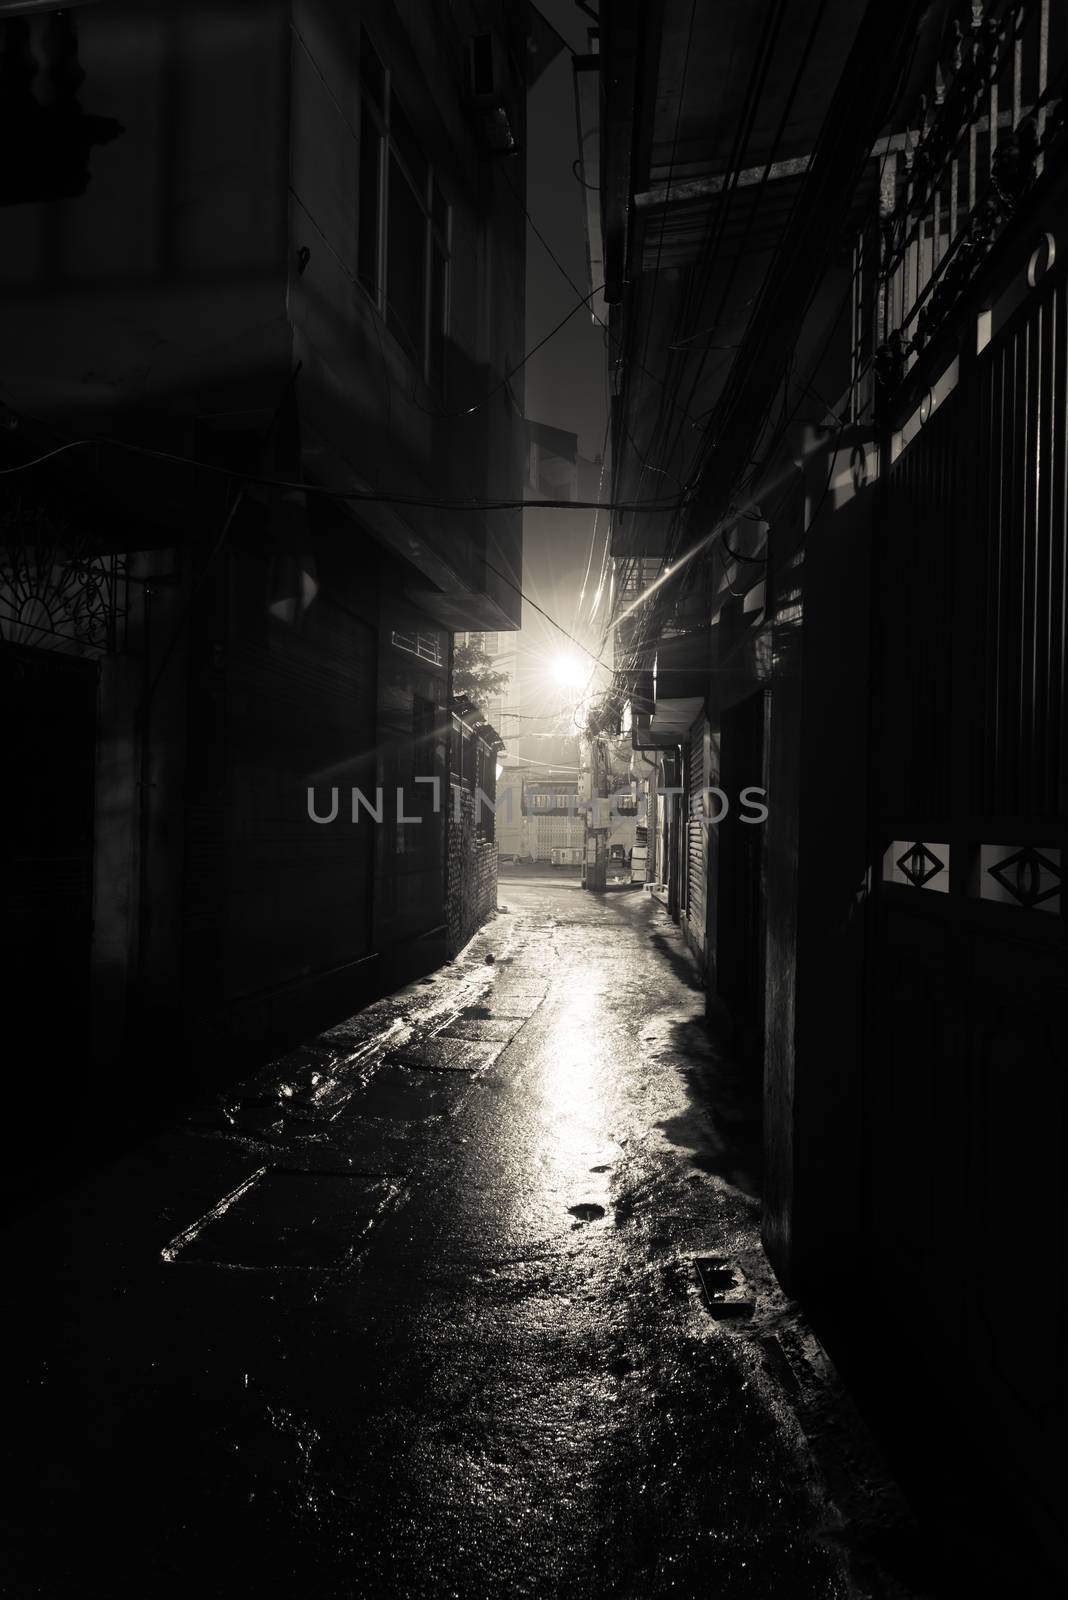 A dark, shadowy and dangerous looking urban back-alley at night time in suburbs Hanoi, Vietnam. Low light reflected on wet pavement from post lamp at the end of long road corner